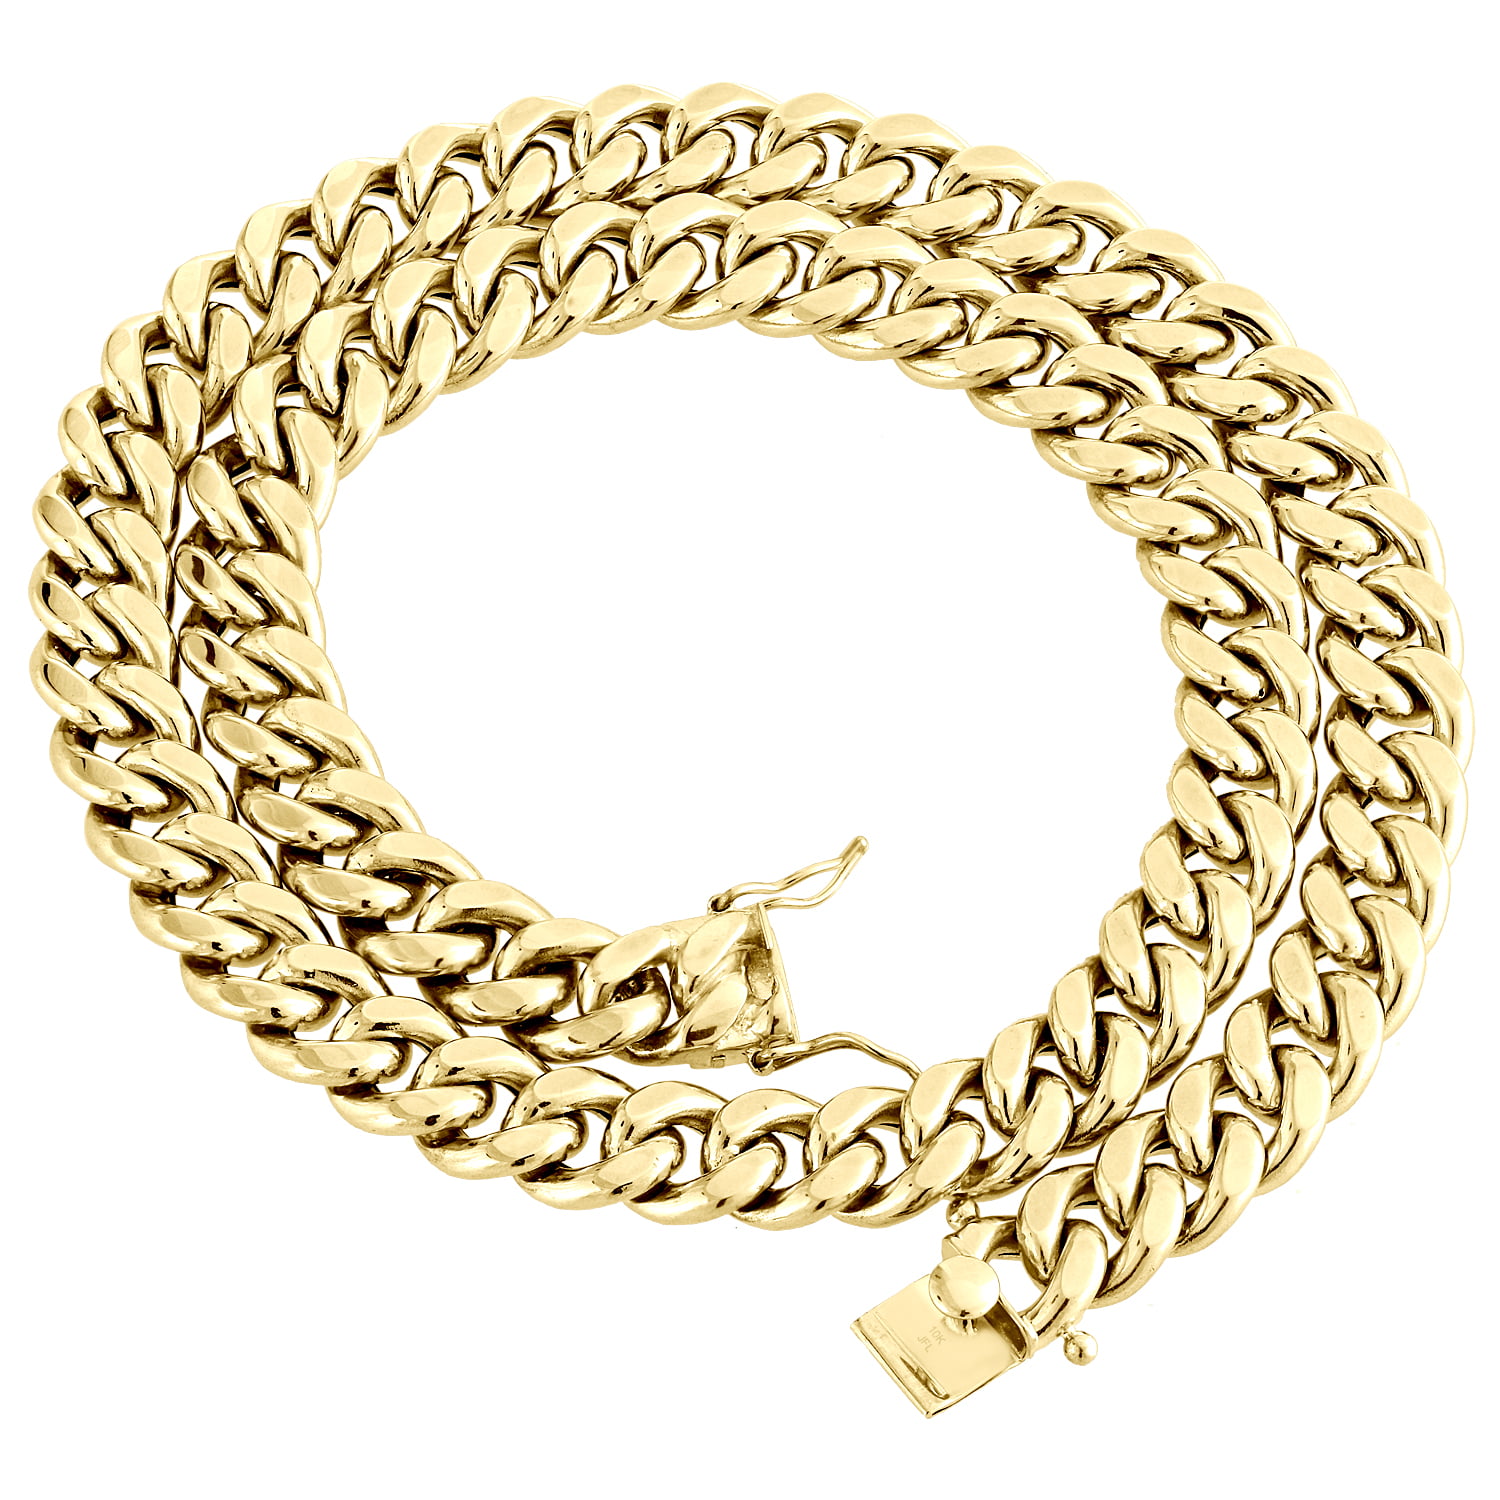 Miami Cuban Link Necklace Iced Out Chain 14k Gold Finish Secure Box Lock 14MM